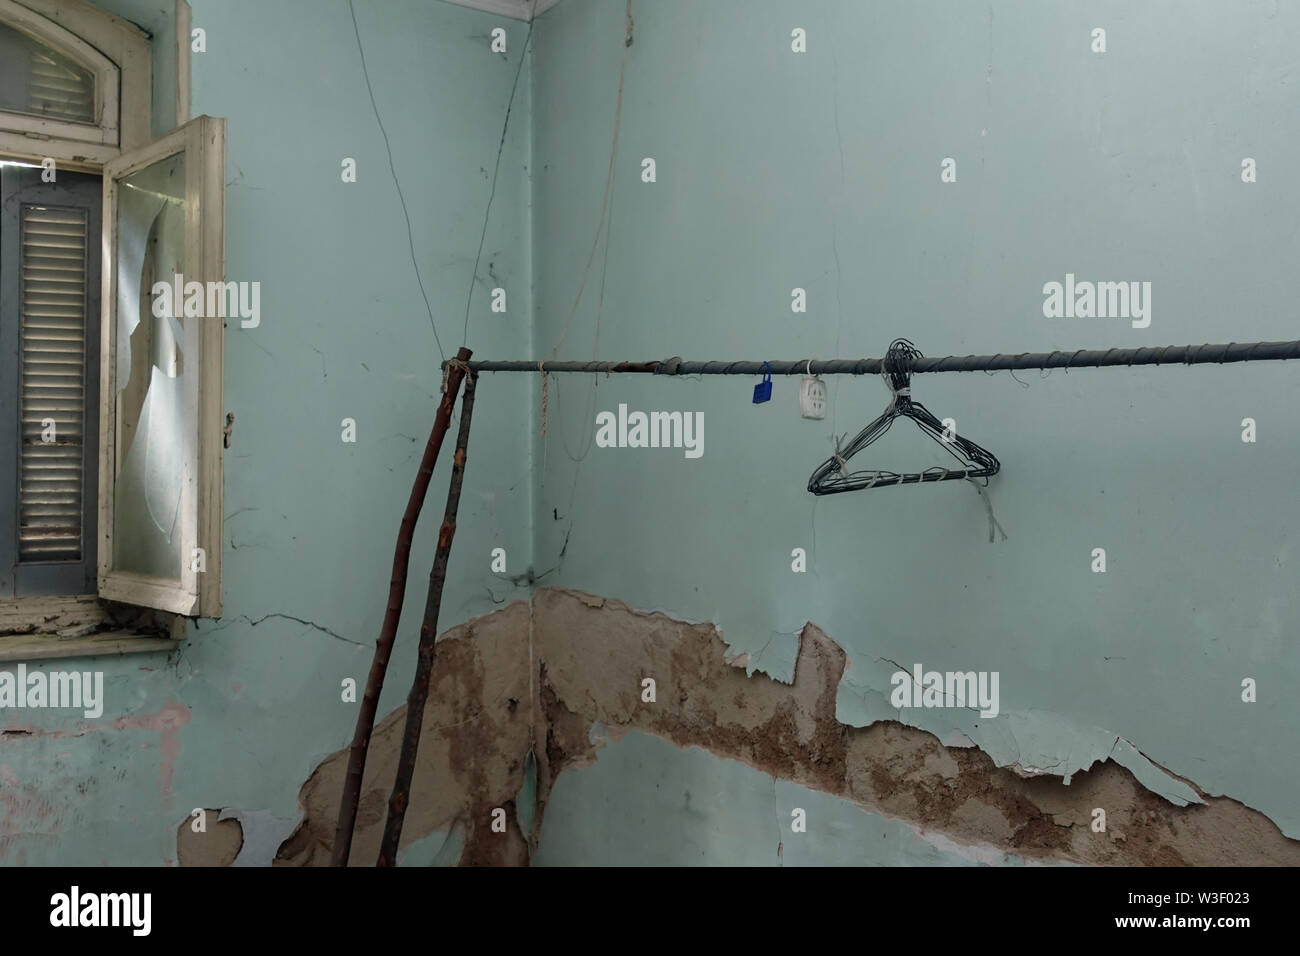 Broken window peeling wall and makeshift clothesline with rusty hangers in decayed blue room interior. Stock Photo